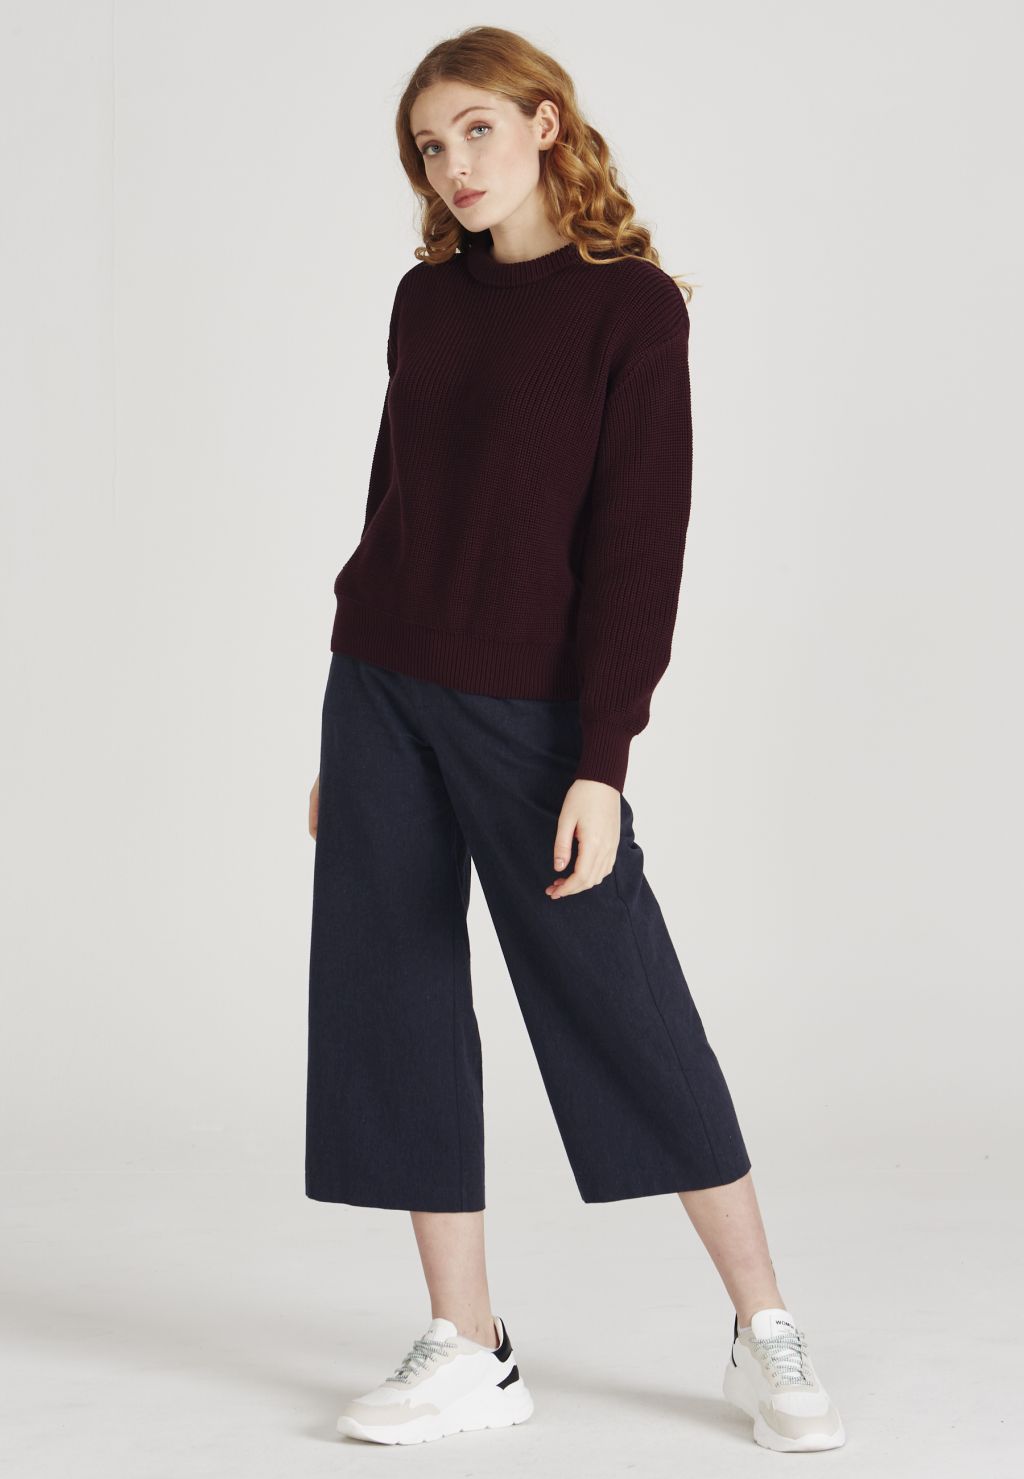 Aria knit - Pullover